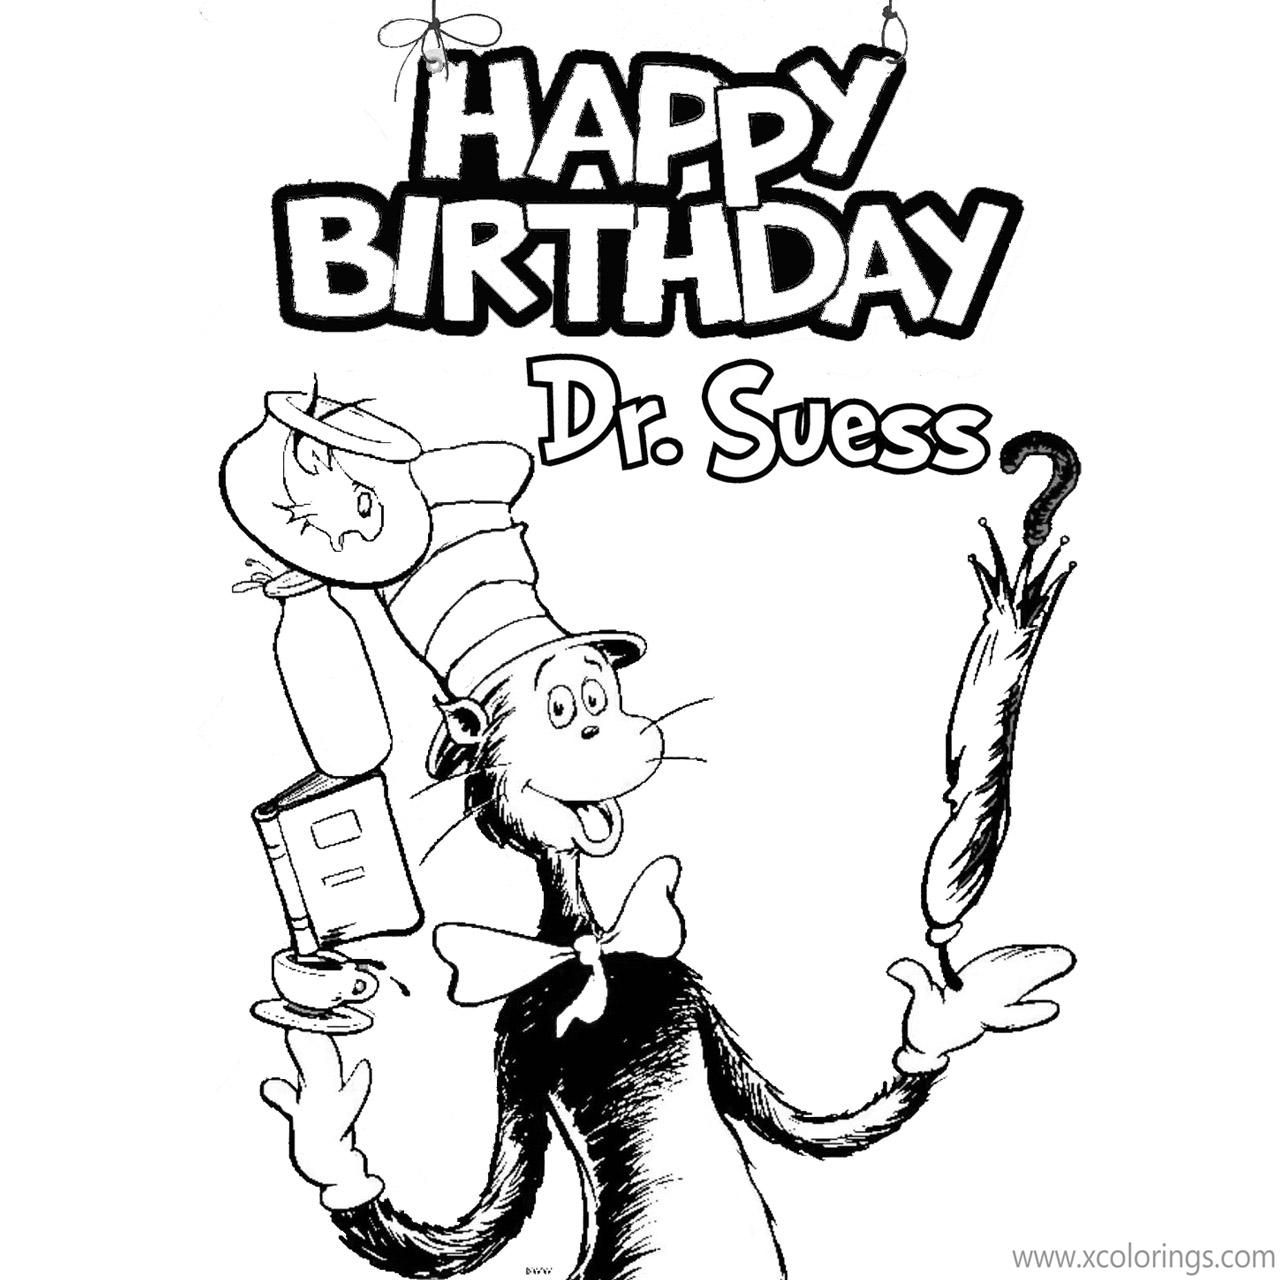 Happy Birthday Dr Seuss Coloring Pages Printable - XColorings.com